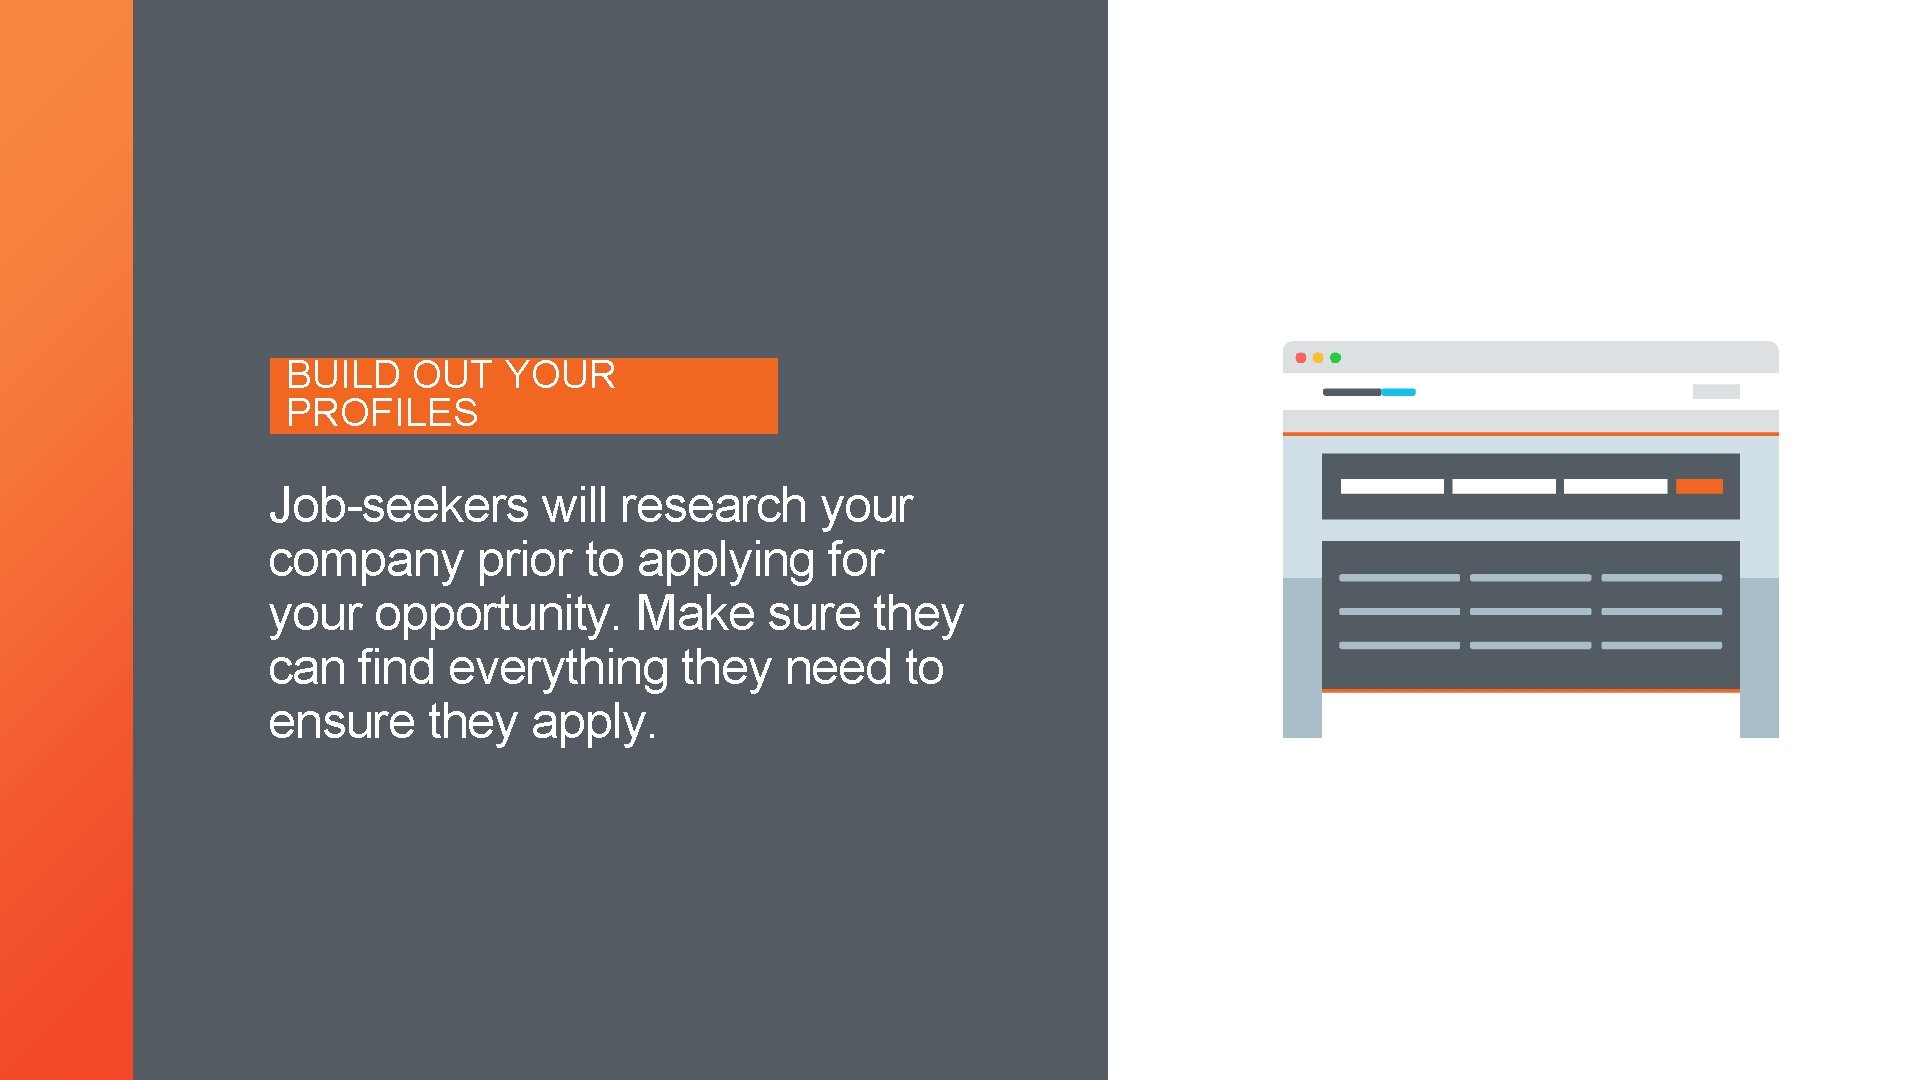 BUILD OUT YOUR PROFILES Job-seekers will research your company prior to applying for your